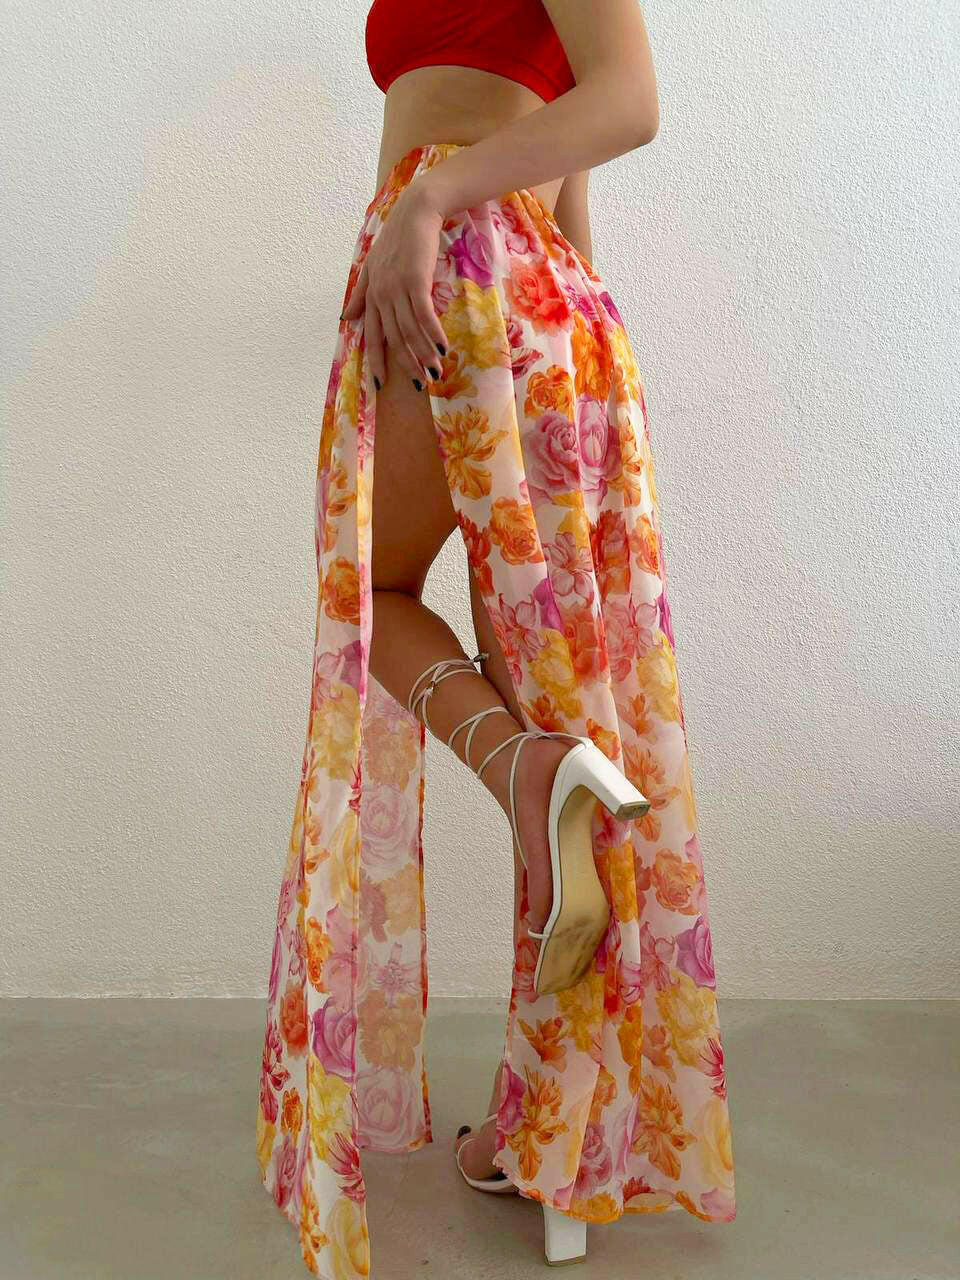 Both Side Slit Colorful Pareo in Orange-White - Noxlook.